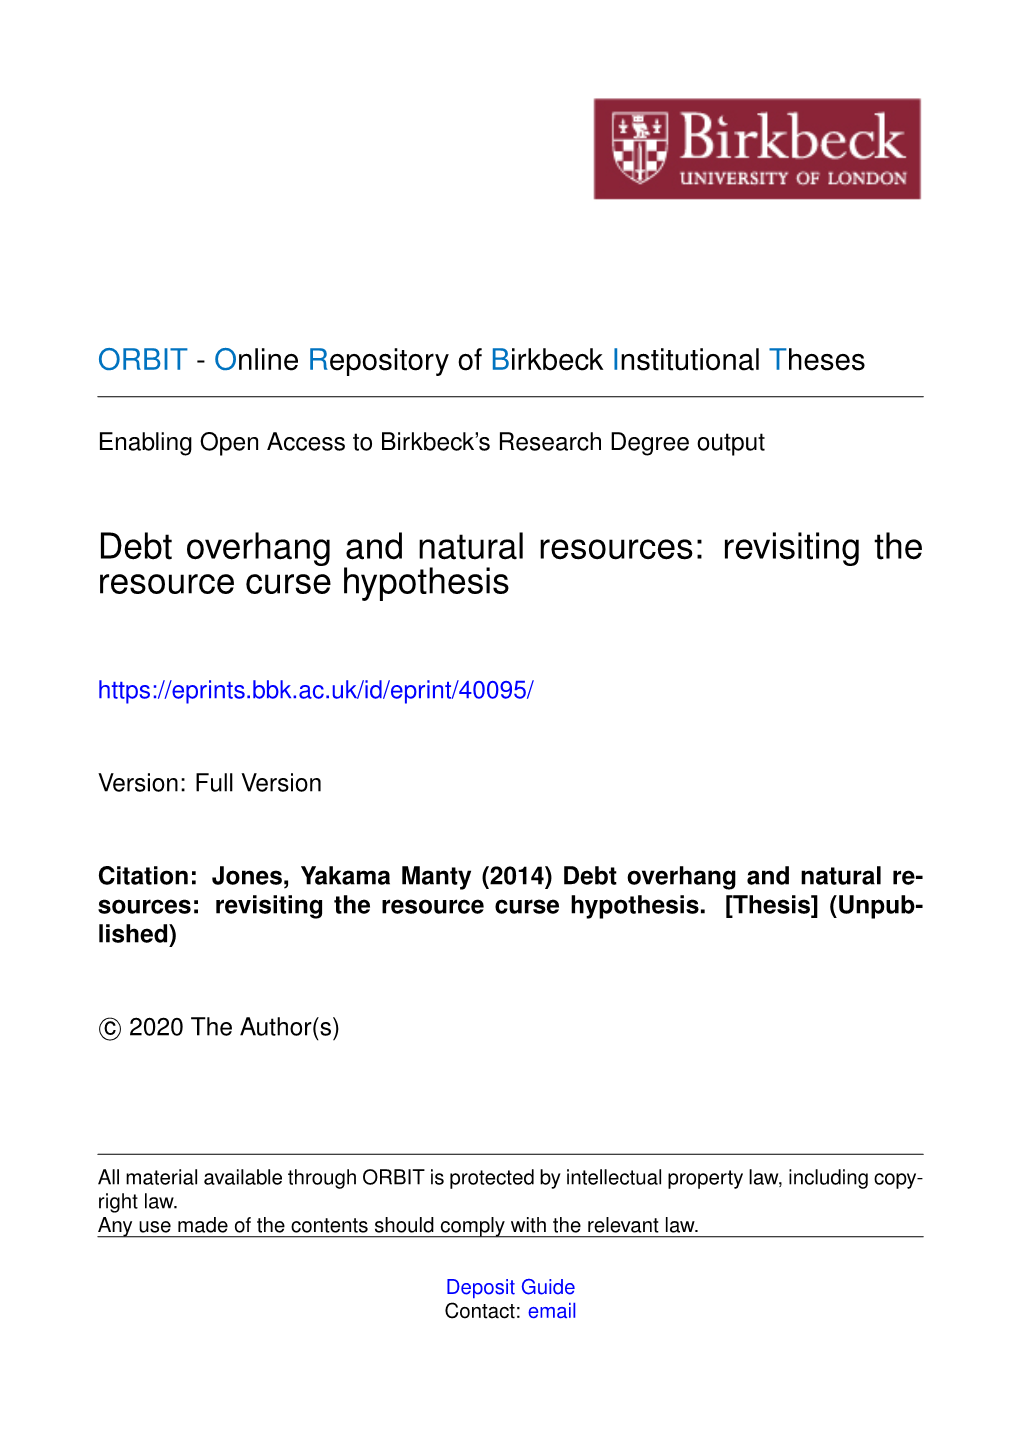 Debt Overhang and Natural Resources: Revisiting the Resource Curse Hypothesis